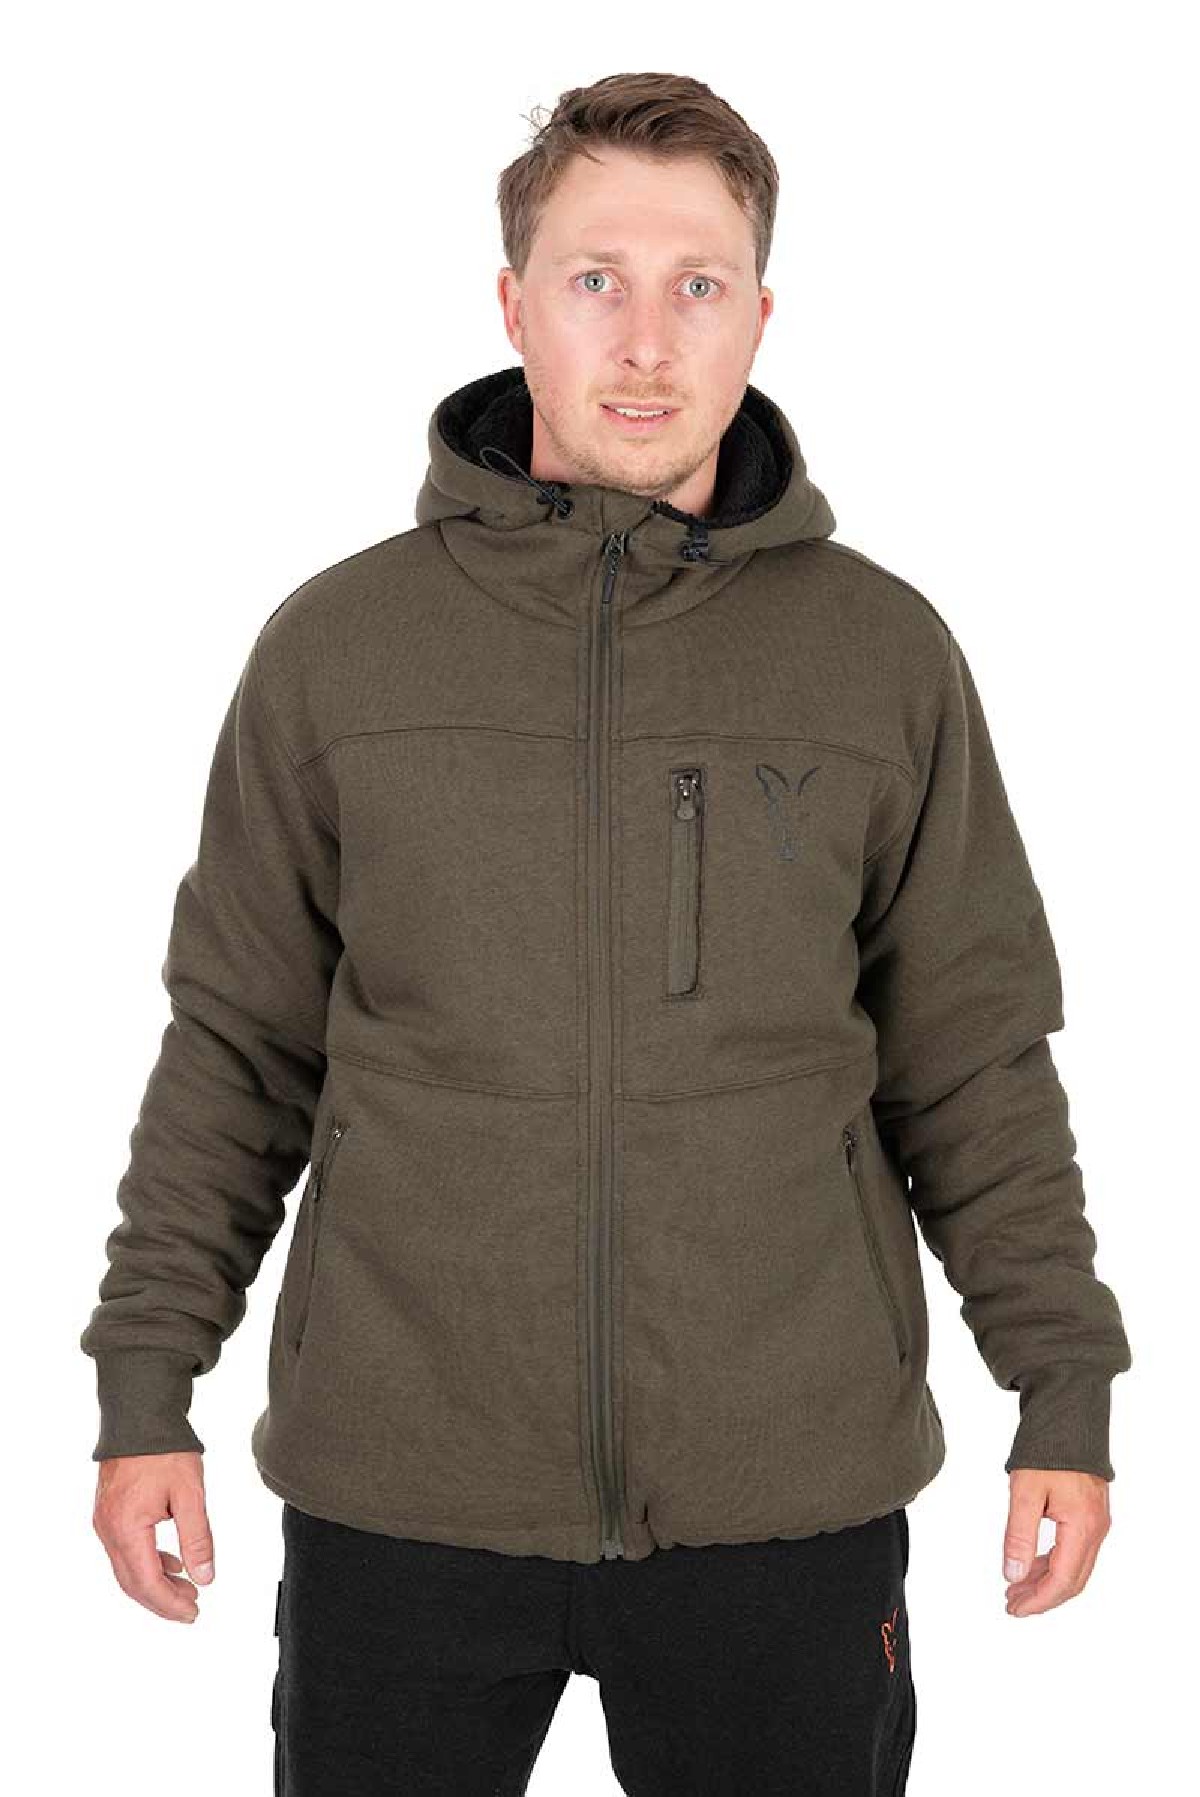 Fox Collection Sherpa Jacket Green & Black Small